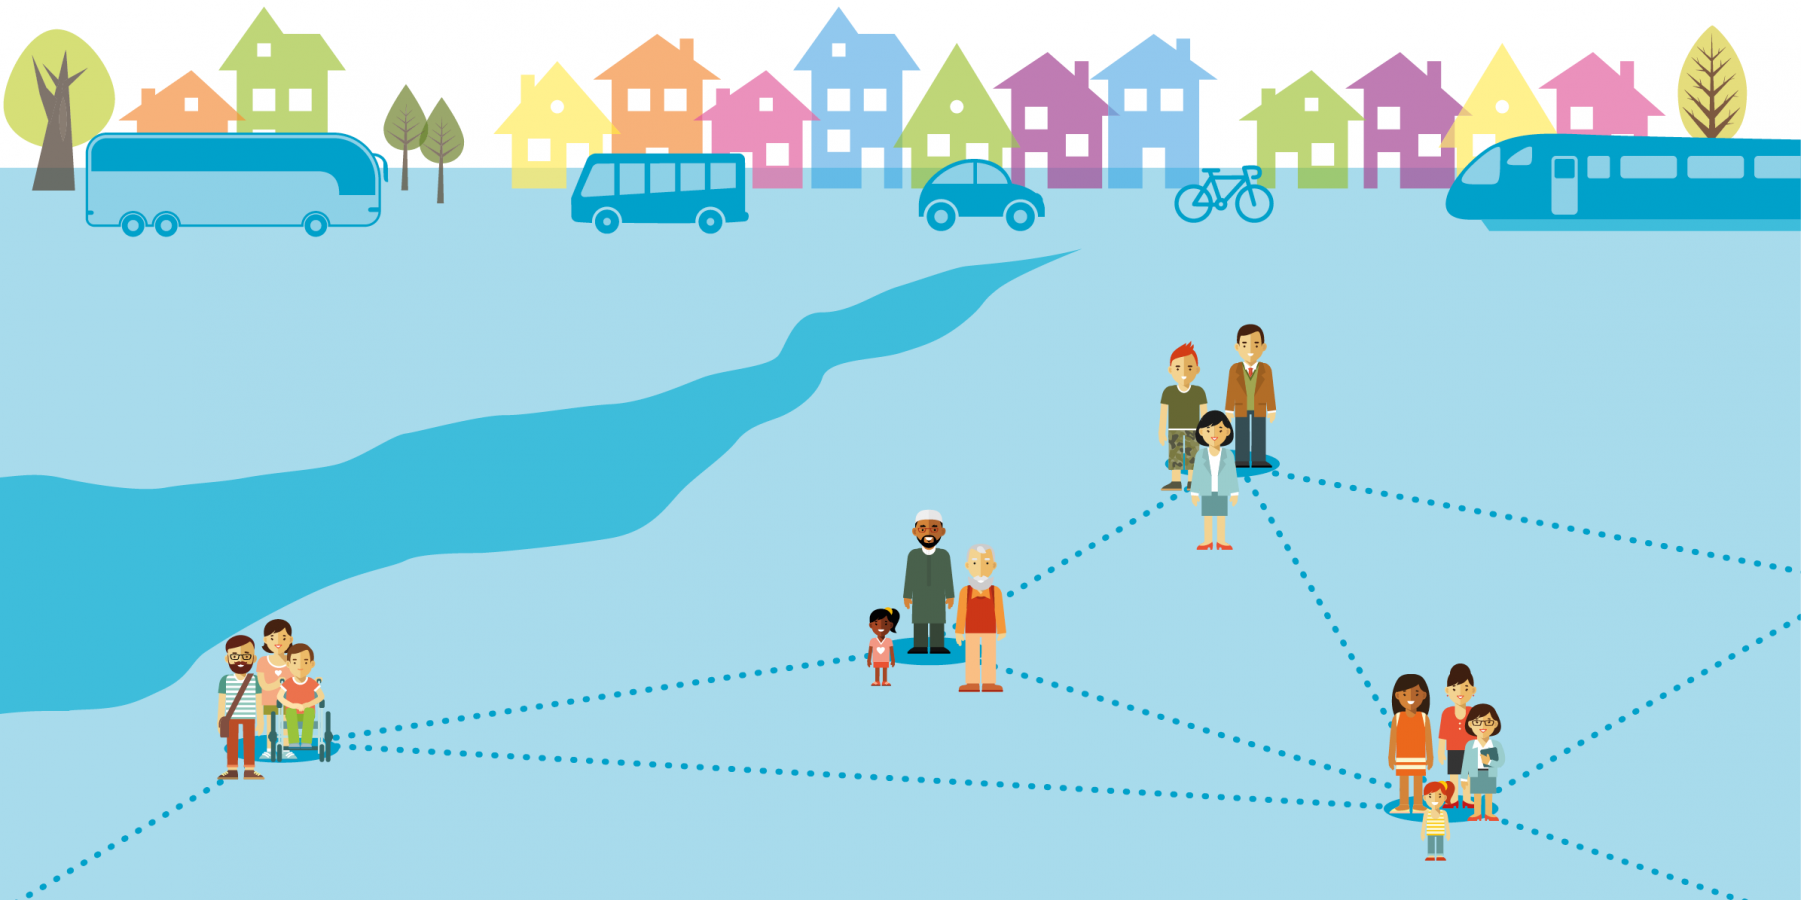 West of England Combined Authority consultation background image illustration showing different groups of people connected via dotted lines and a coach, bus, car, bicycle and train in the background in front of colourful line of houses and trees.